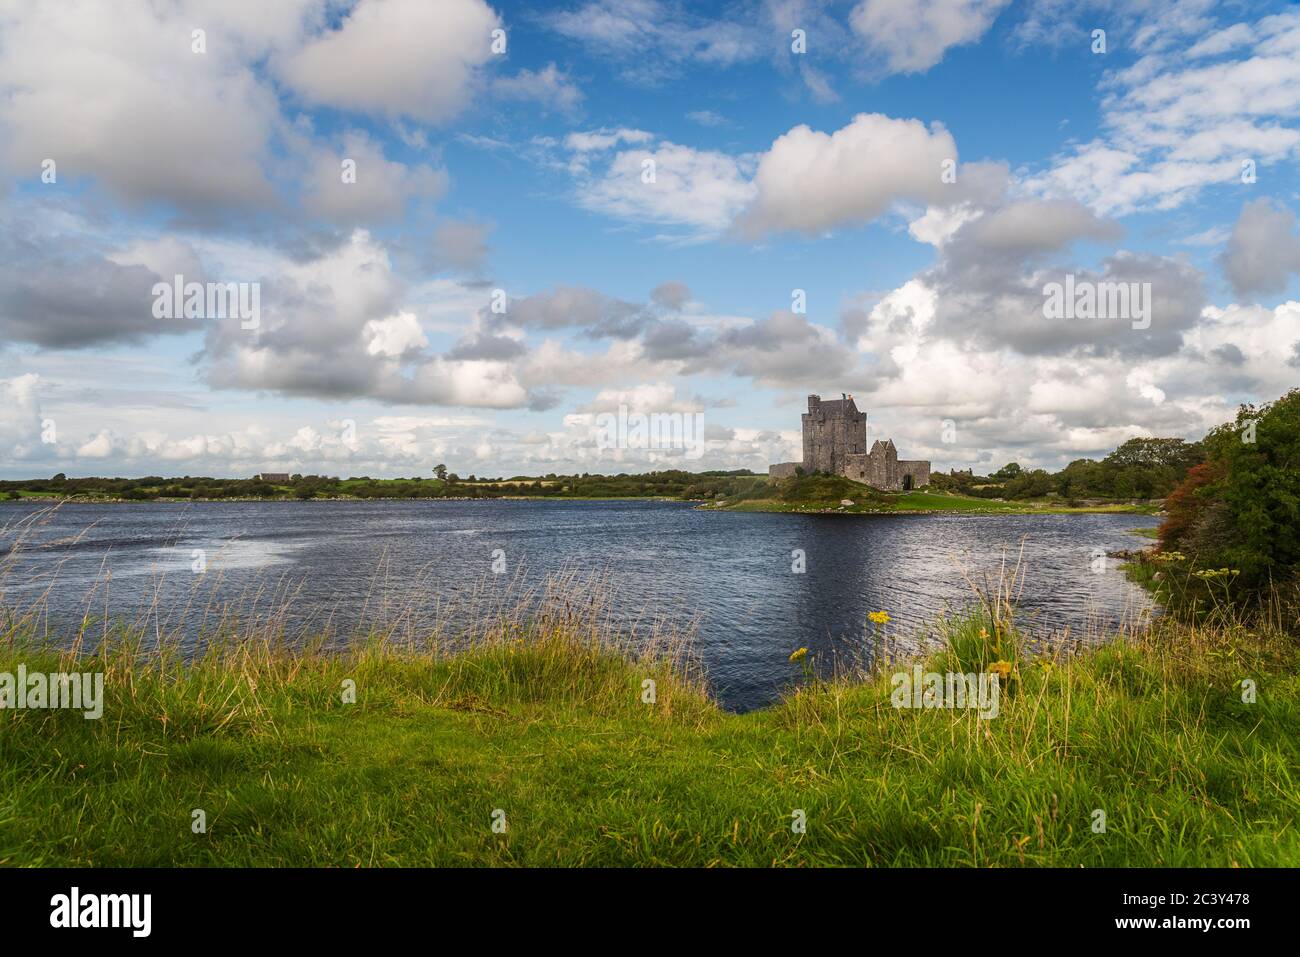 Castle of Dunguaire in Ireland Stock Photo - Alamy